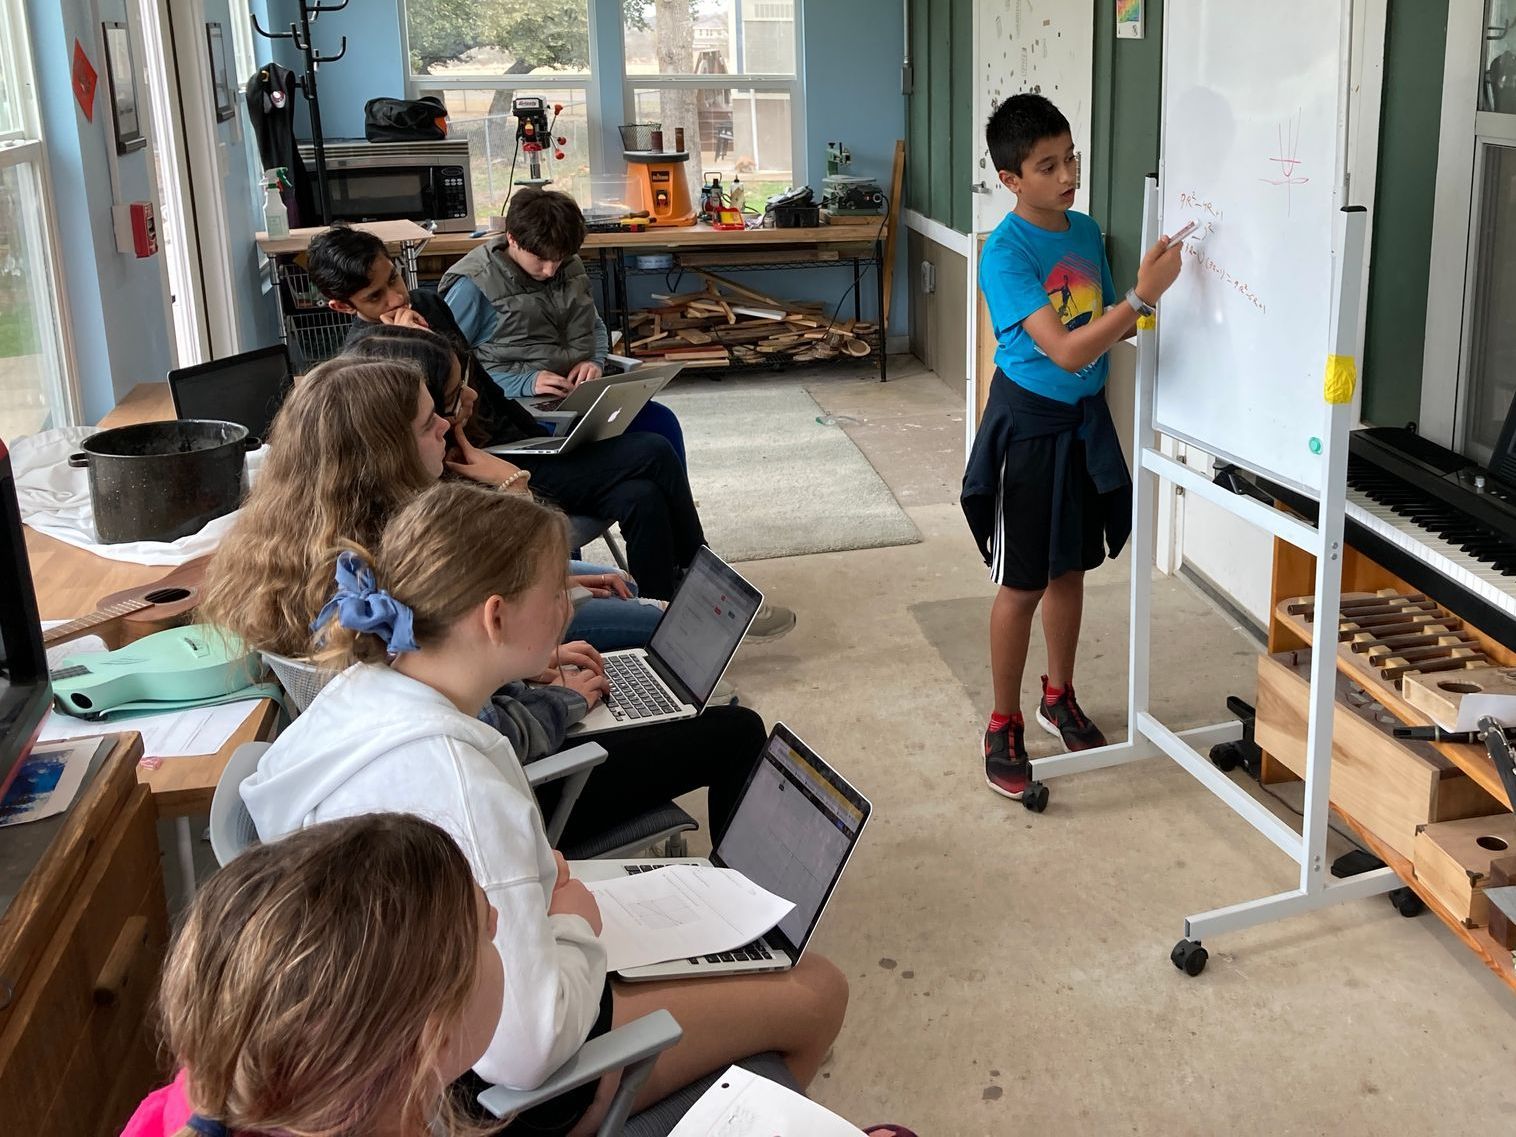 A Montessori student in a blue shirt is writing on a white board